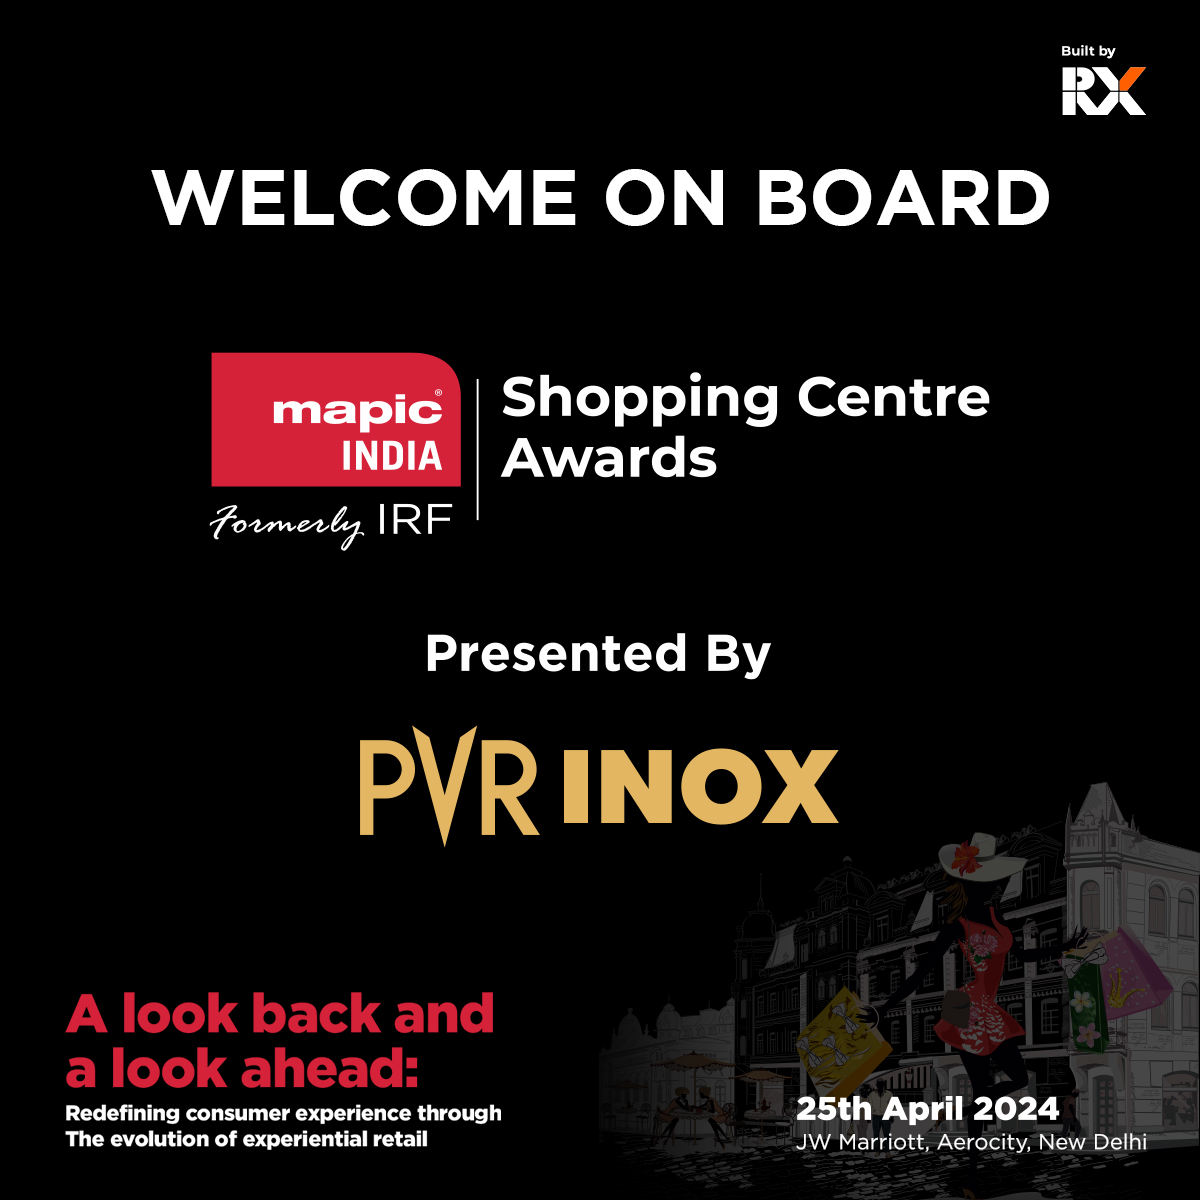 We are delighted to welcome onboard ''PVR INOX'' as our valued ''𝐏𝐫𝐞𝐬𝐞𝐧𝐭𝐞𝐝 𝐁𝐲 𝐏𝐚𝐫𝐭𝐧𝐞𝐫'' at the upcoming MAPIC India 𝐒𝐡𝐨𝐩𝐩𝐢𝐧𝐠 𝐂𝐞𝐧𝐭𝐫𝐞 𝐑𝐞𝐭𝐚𝐢𝐥 𝐒𝐮𝐦𝐦𝐢𝐭 𝐚𝐧𝐝 𝐀𝐰𝐚𝐫𝐝𝐬

#Mapic2024 #Conferences #Exhibitions #Networking #Awards #Delegates